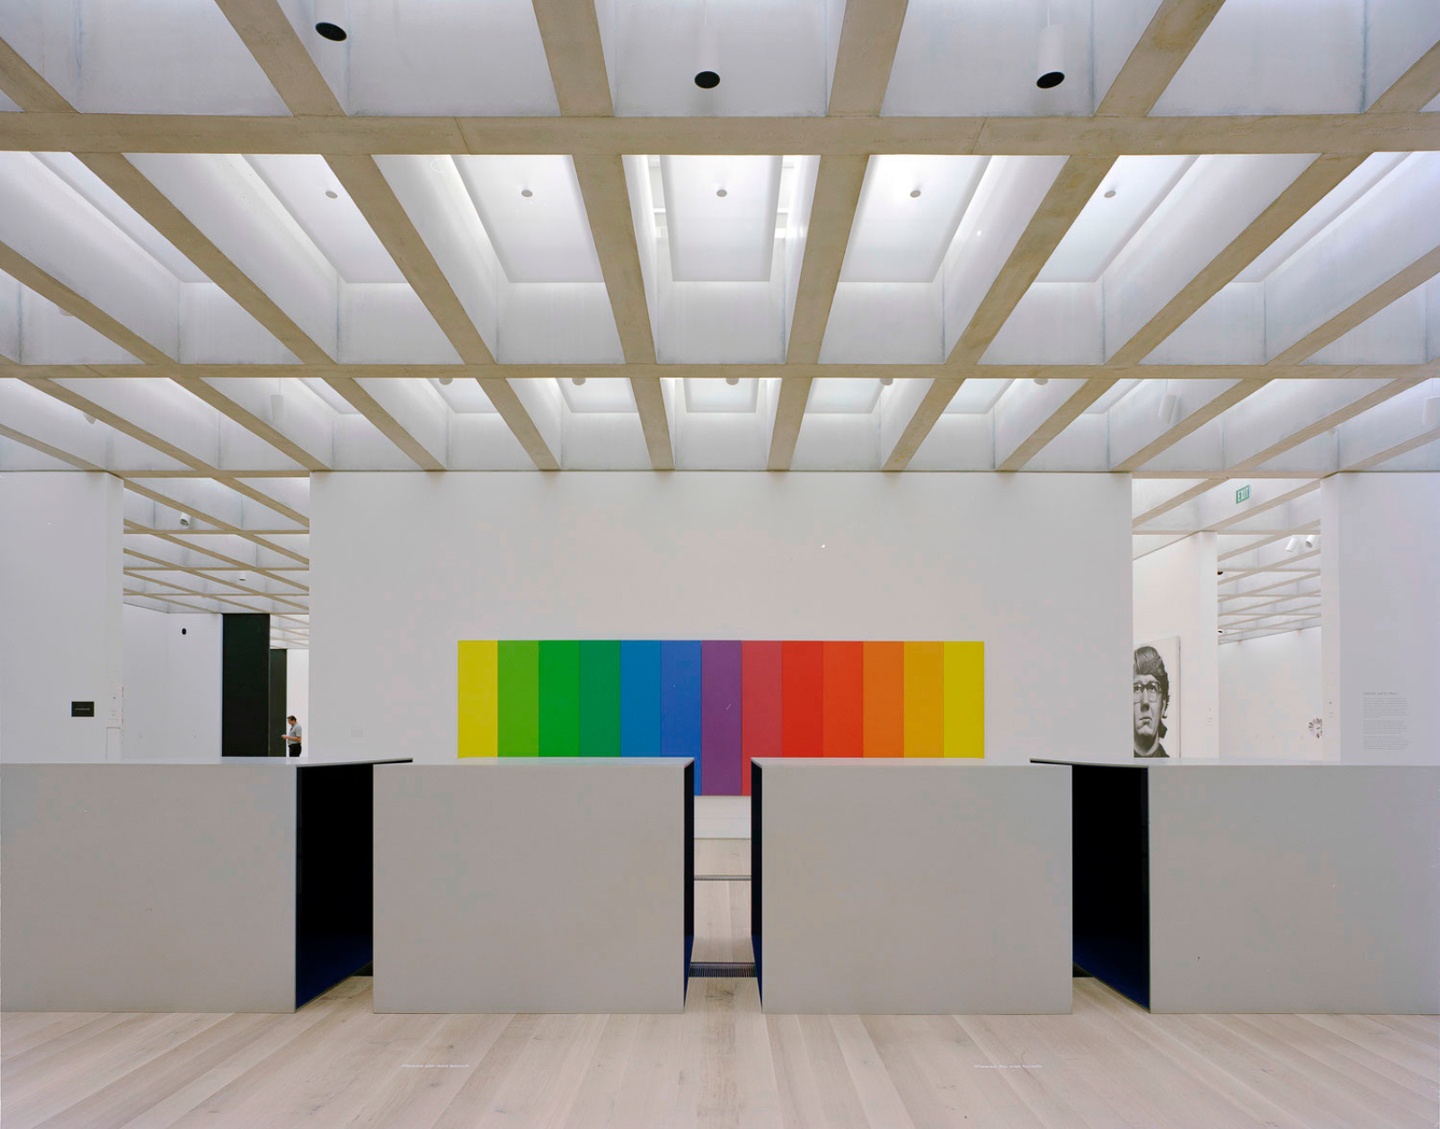 Interior gallery space featuring a high ceiling with perpendicular beams. A paneled, rainbow-colored artwork is displayed on the back wall, with four square pedestals in the foreground.